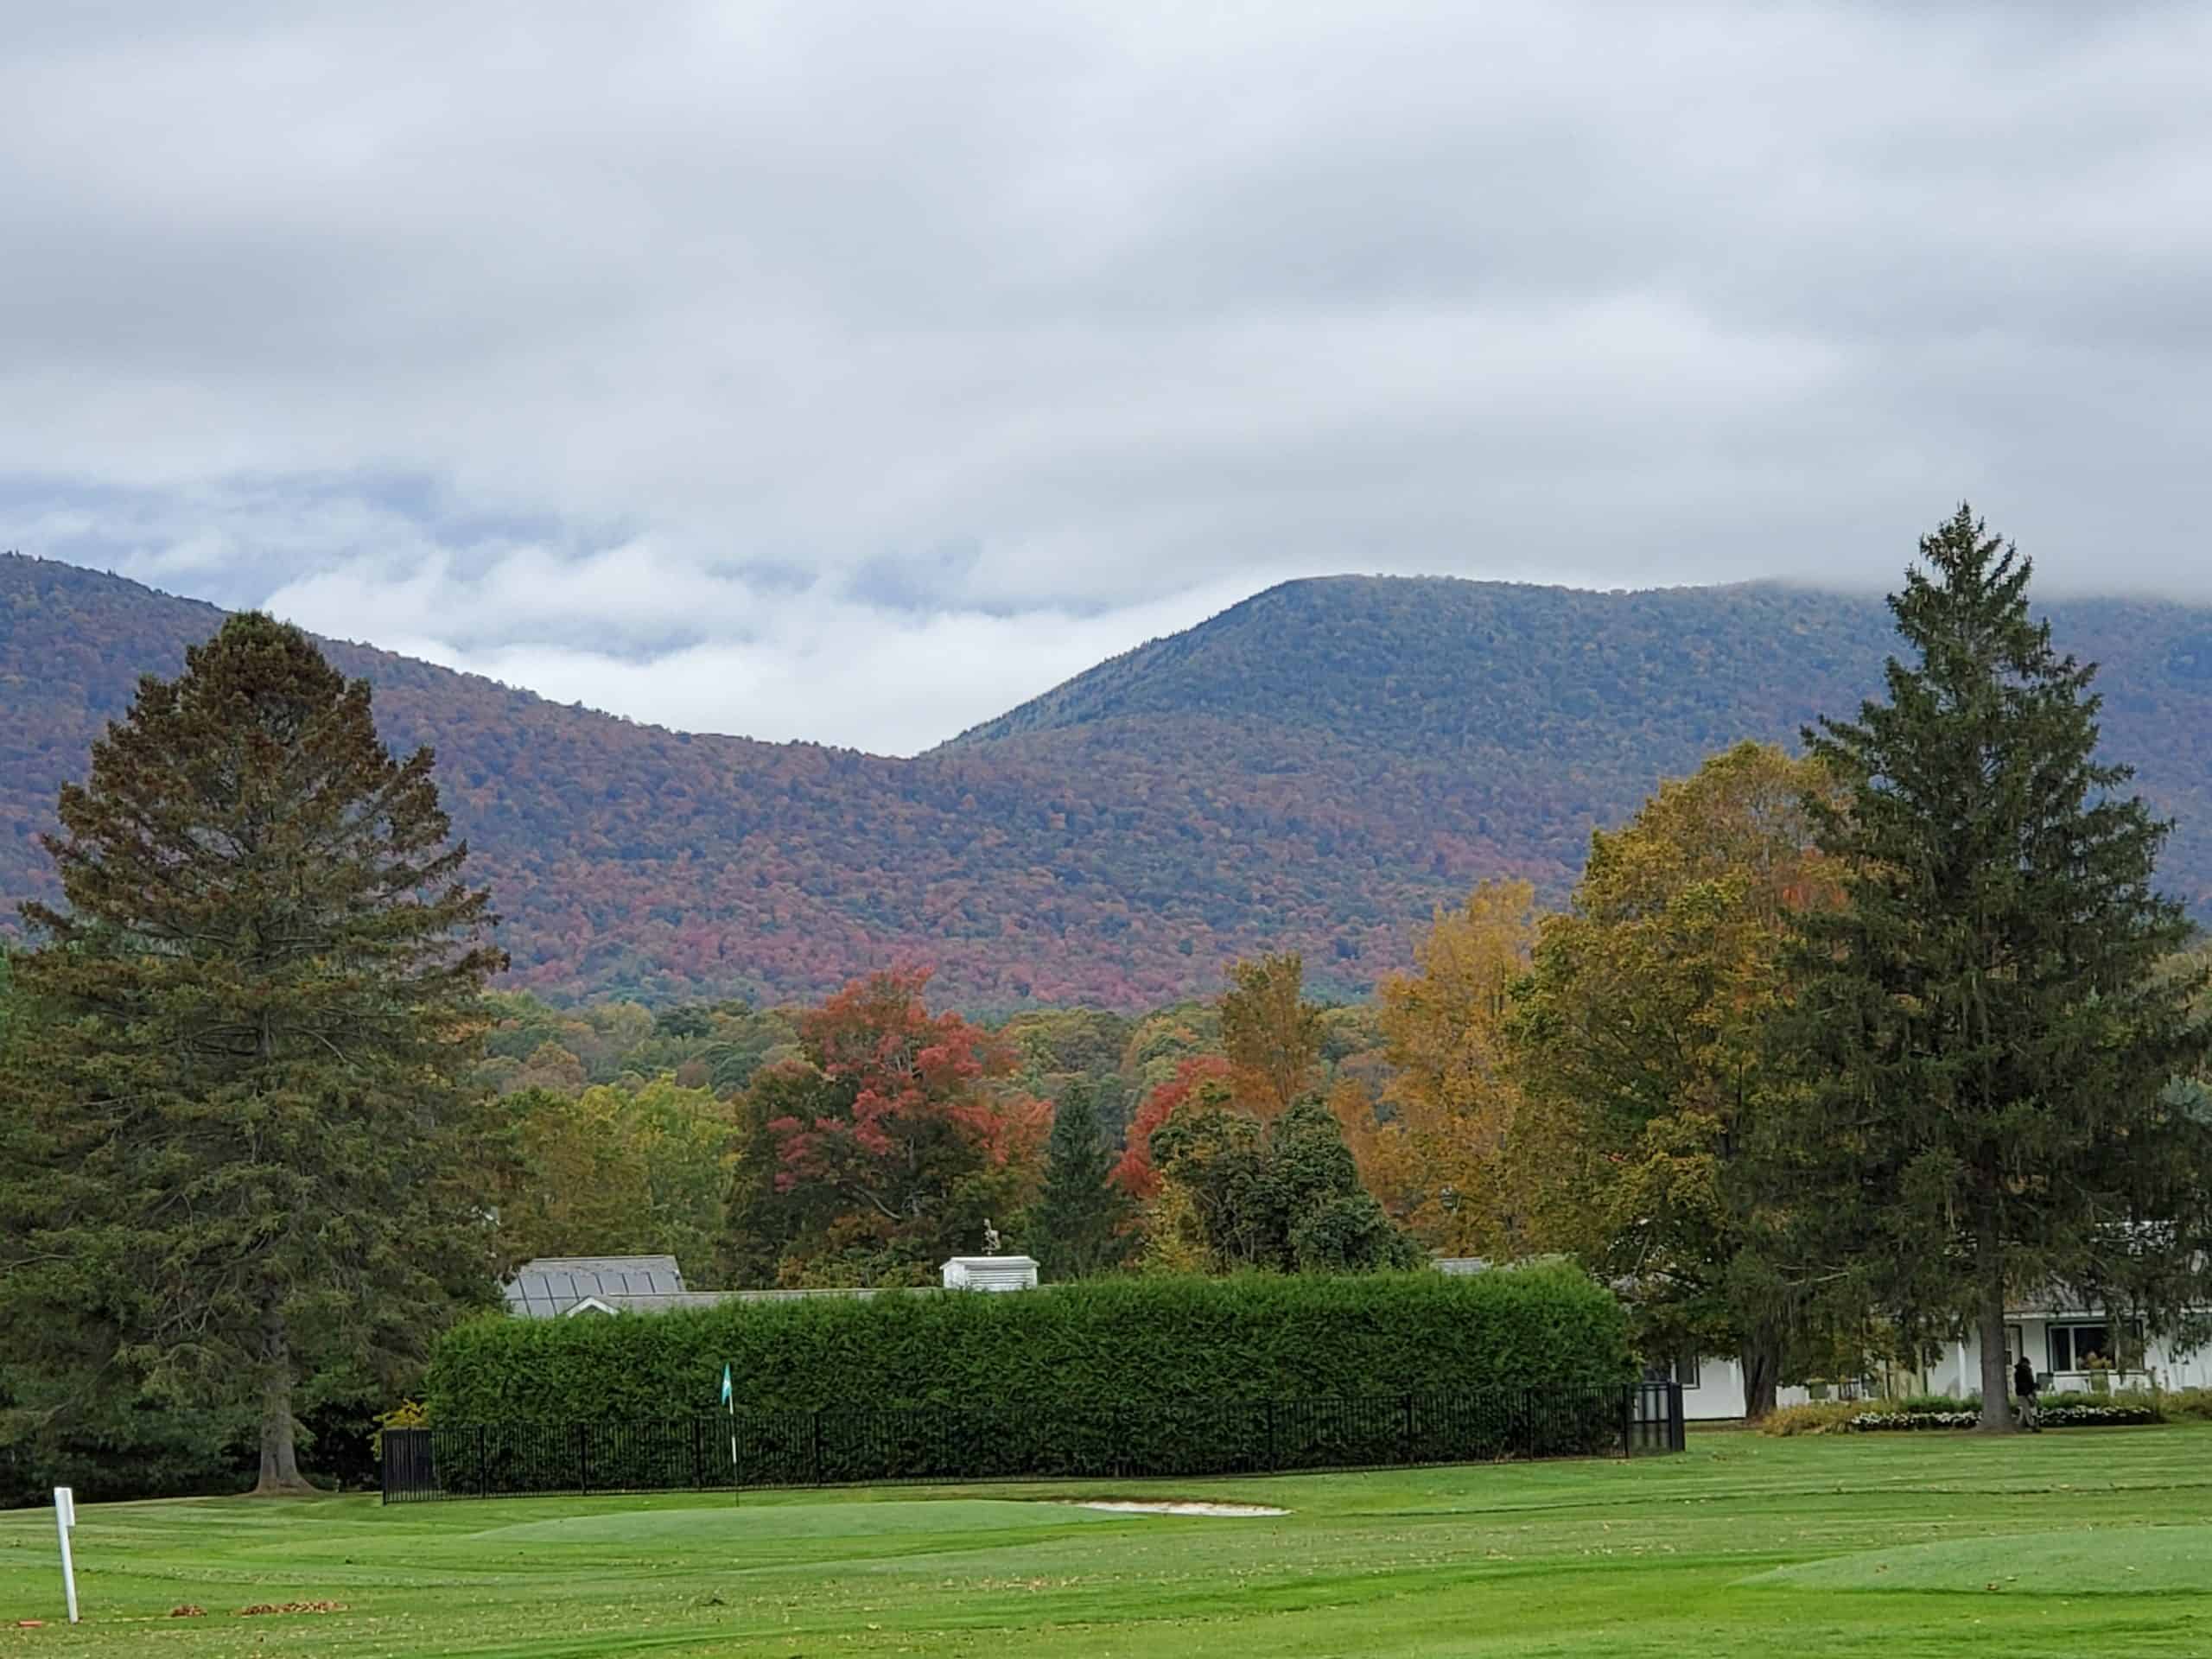 2019/10/03 - Fall in Manchester, VT - by Renee-Marie Smith